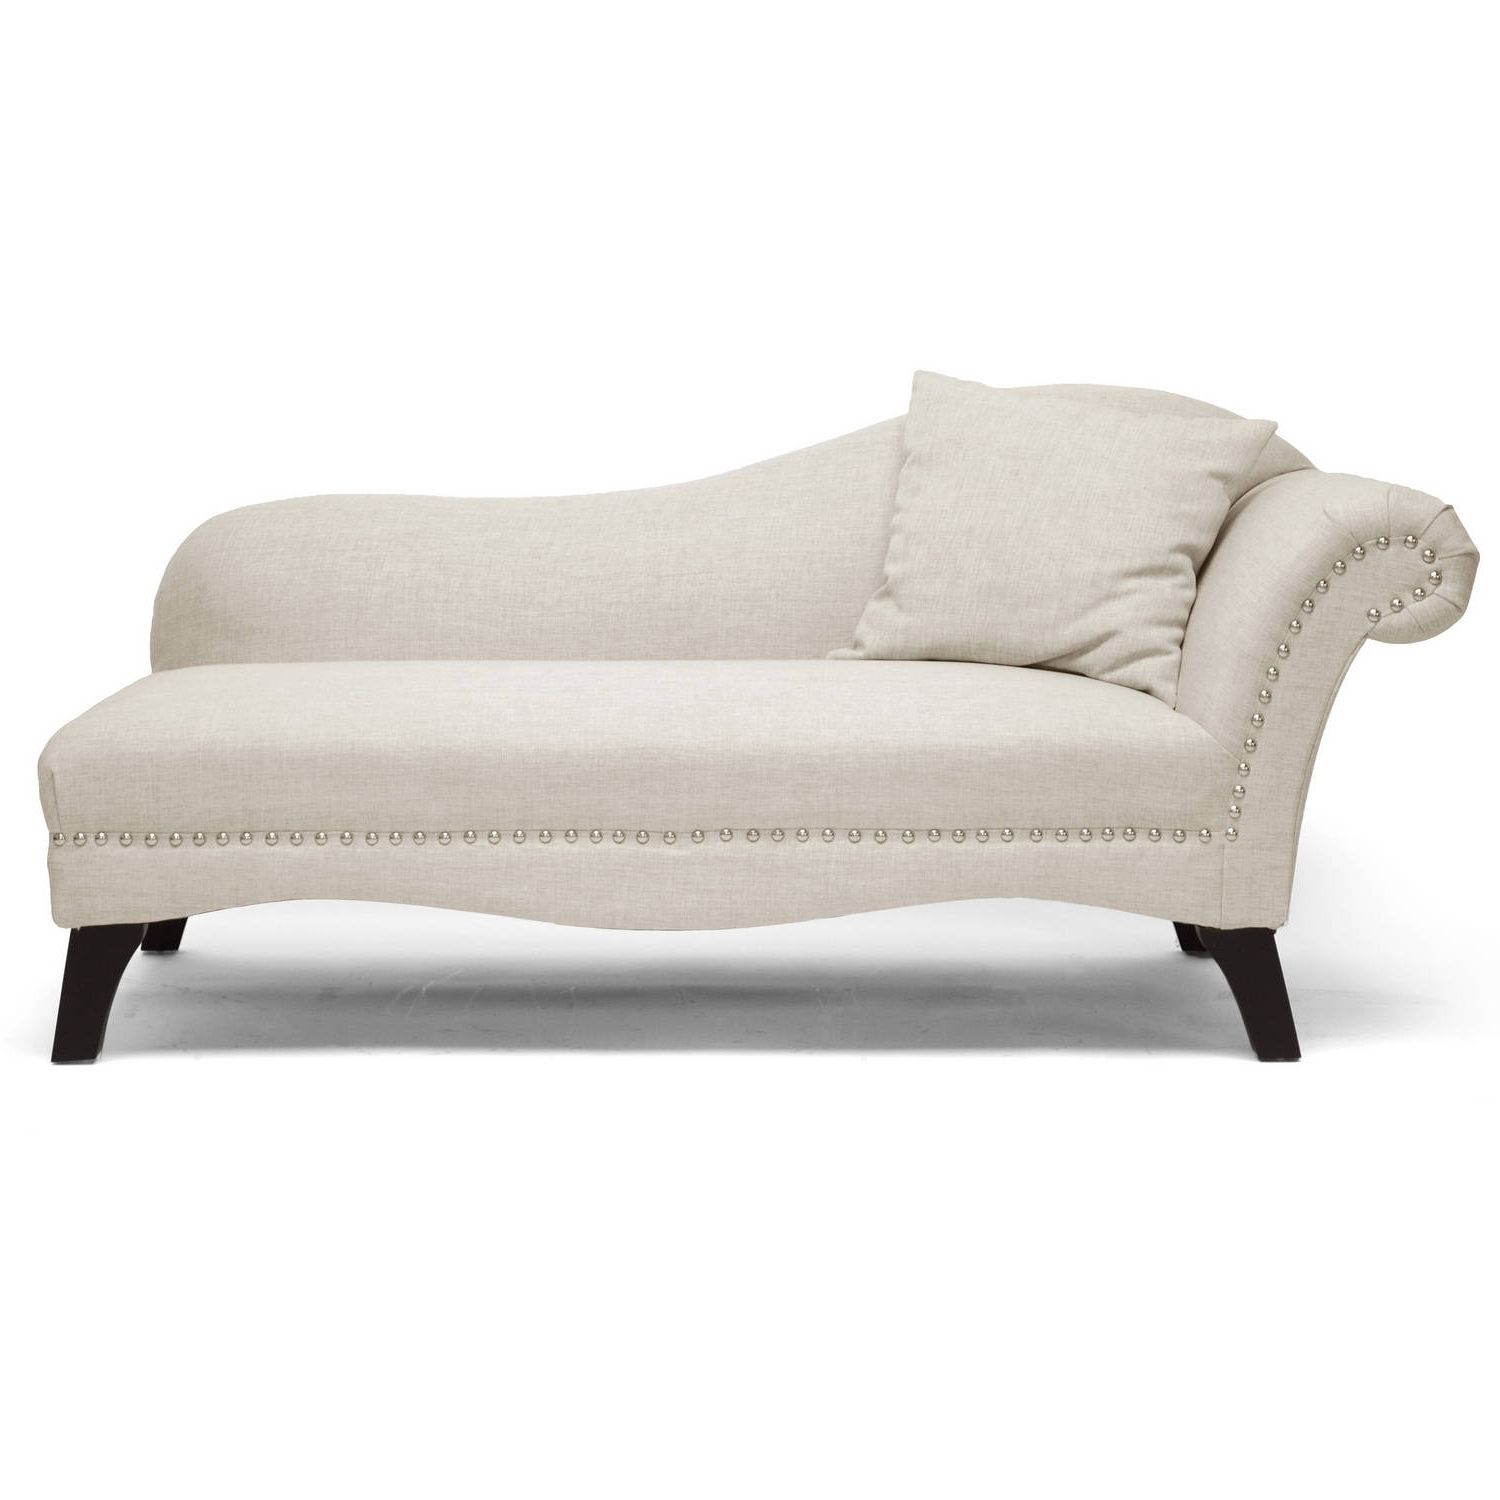 Chaise Lounges – Walmart For Best And Newest White Chaises (View 5 of 15)